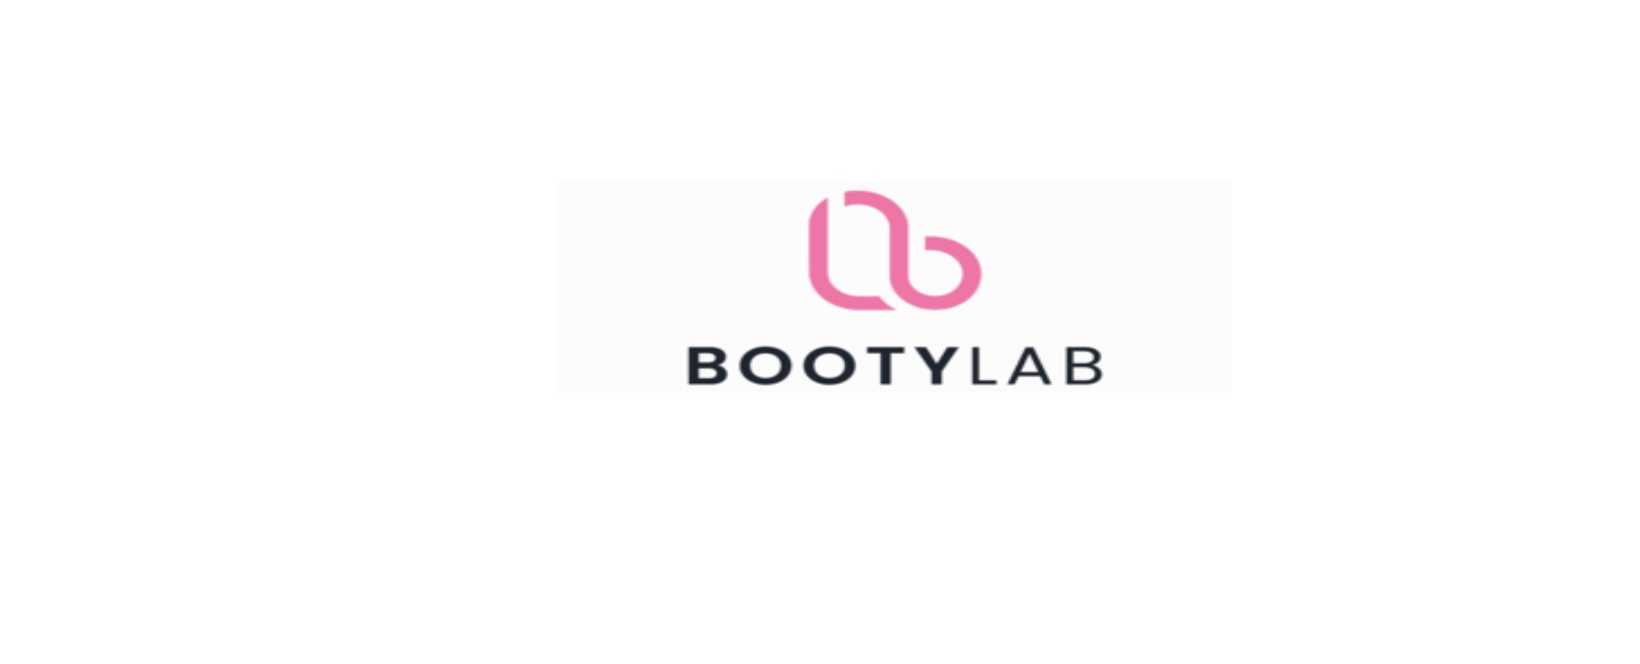 BootyLab Discount Code 2022